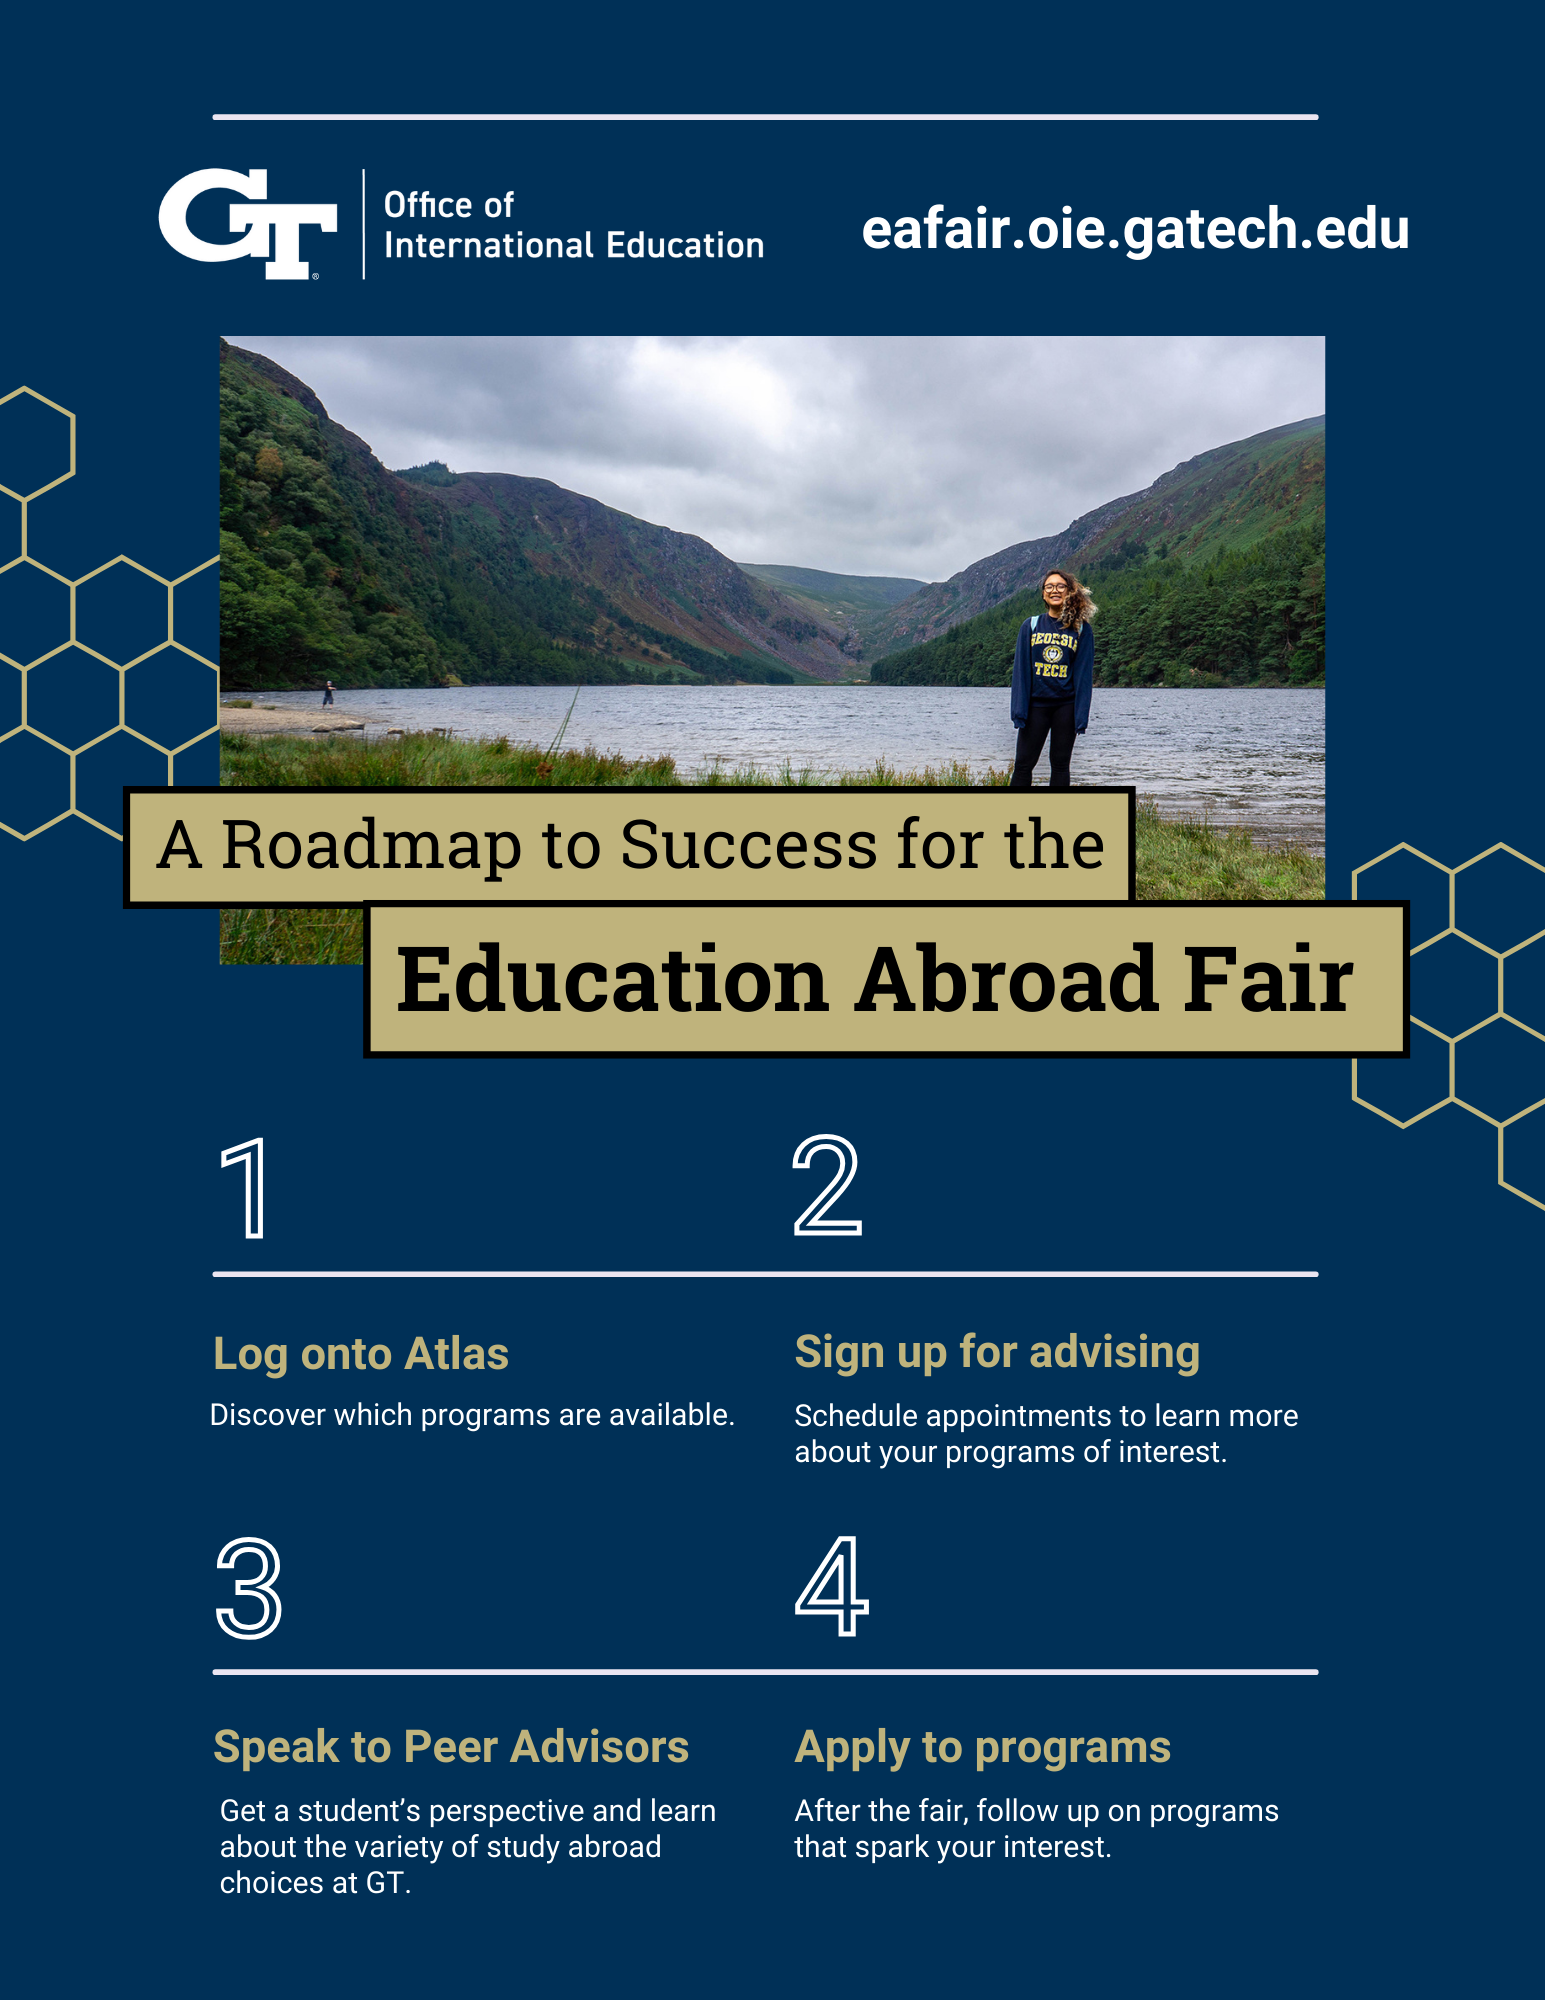 Step by step guide on how to prepare for the education abroad fair.